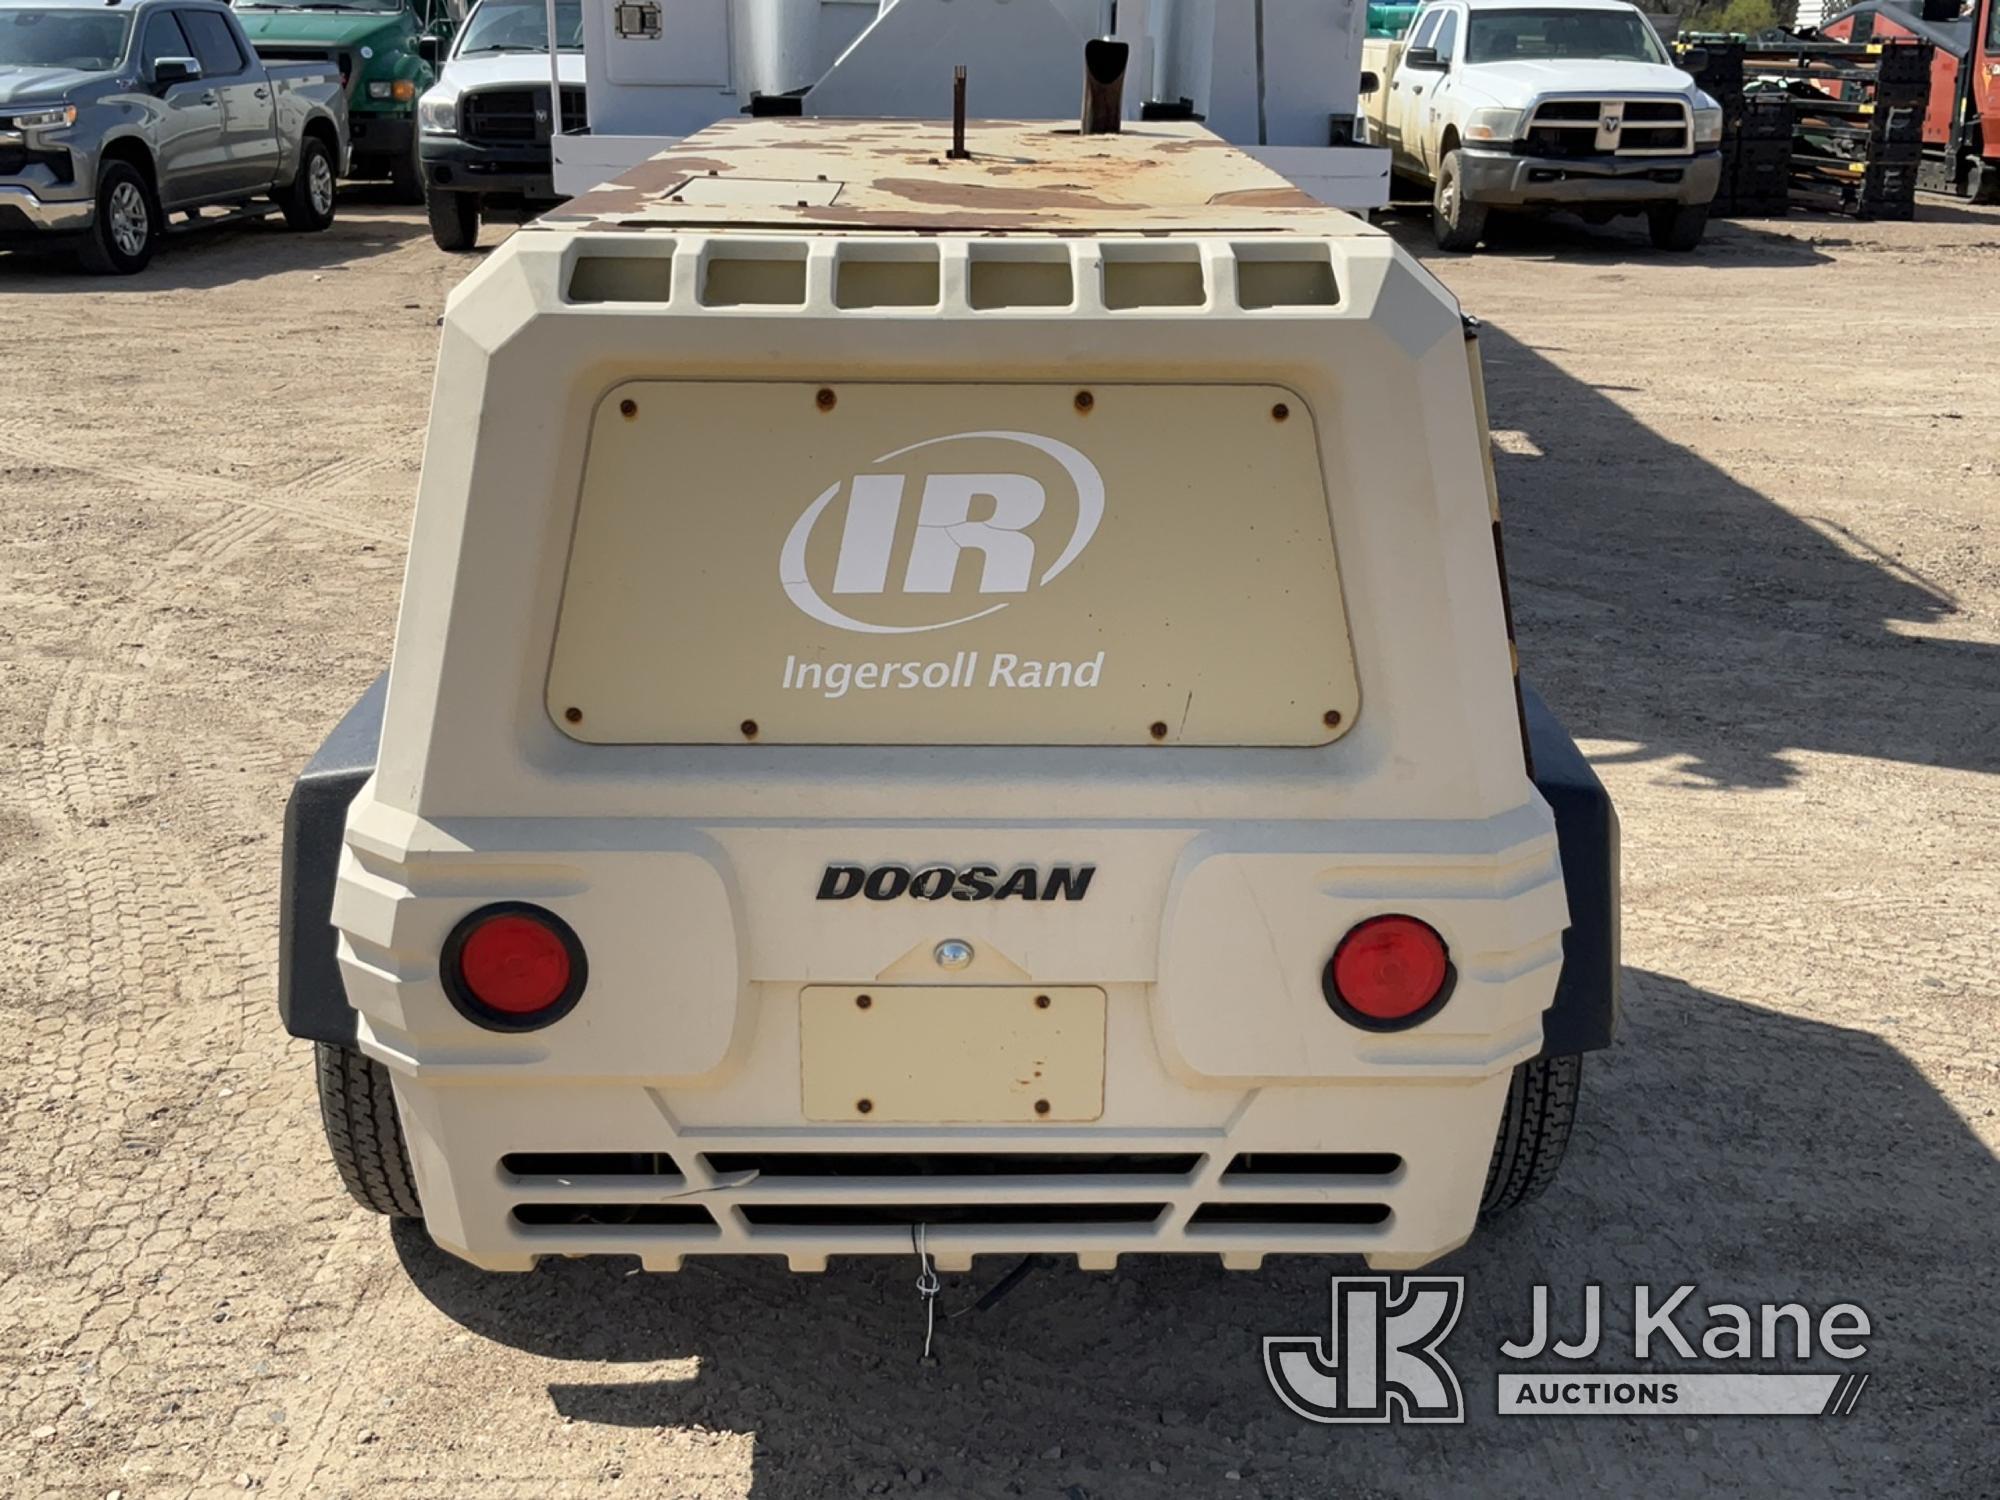 (Shakopee, MN) 2008 Ingersoll Rand Portable Air Compressor, Trailer mounted No Title) (Condition Unk